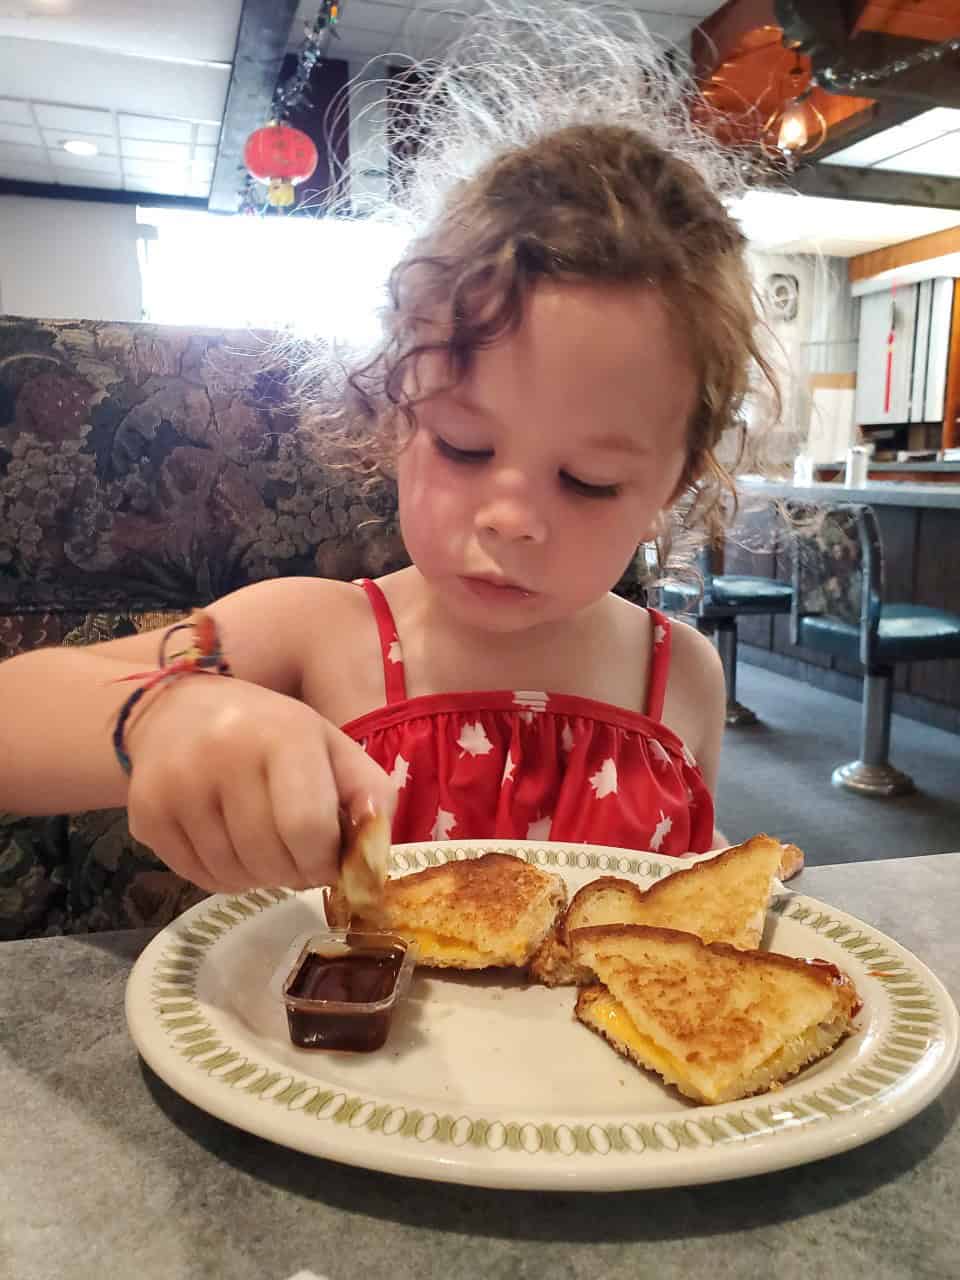 Grilled Cheese and Maple Syrup  - Such a little Canadian...grilled cheese with maple syrup and her maple leaf bathing suit!